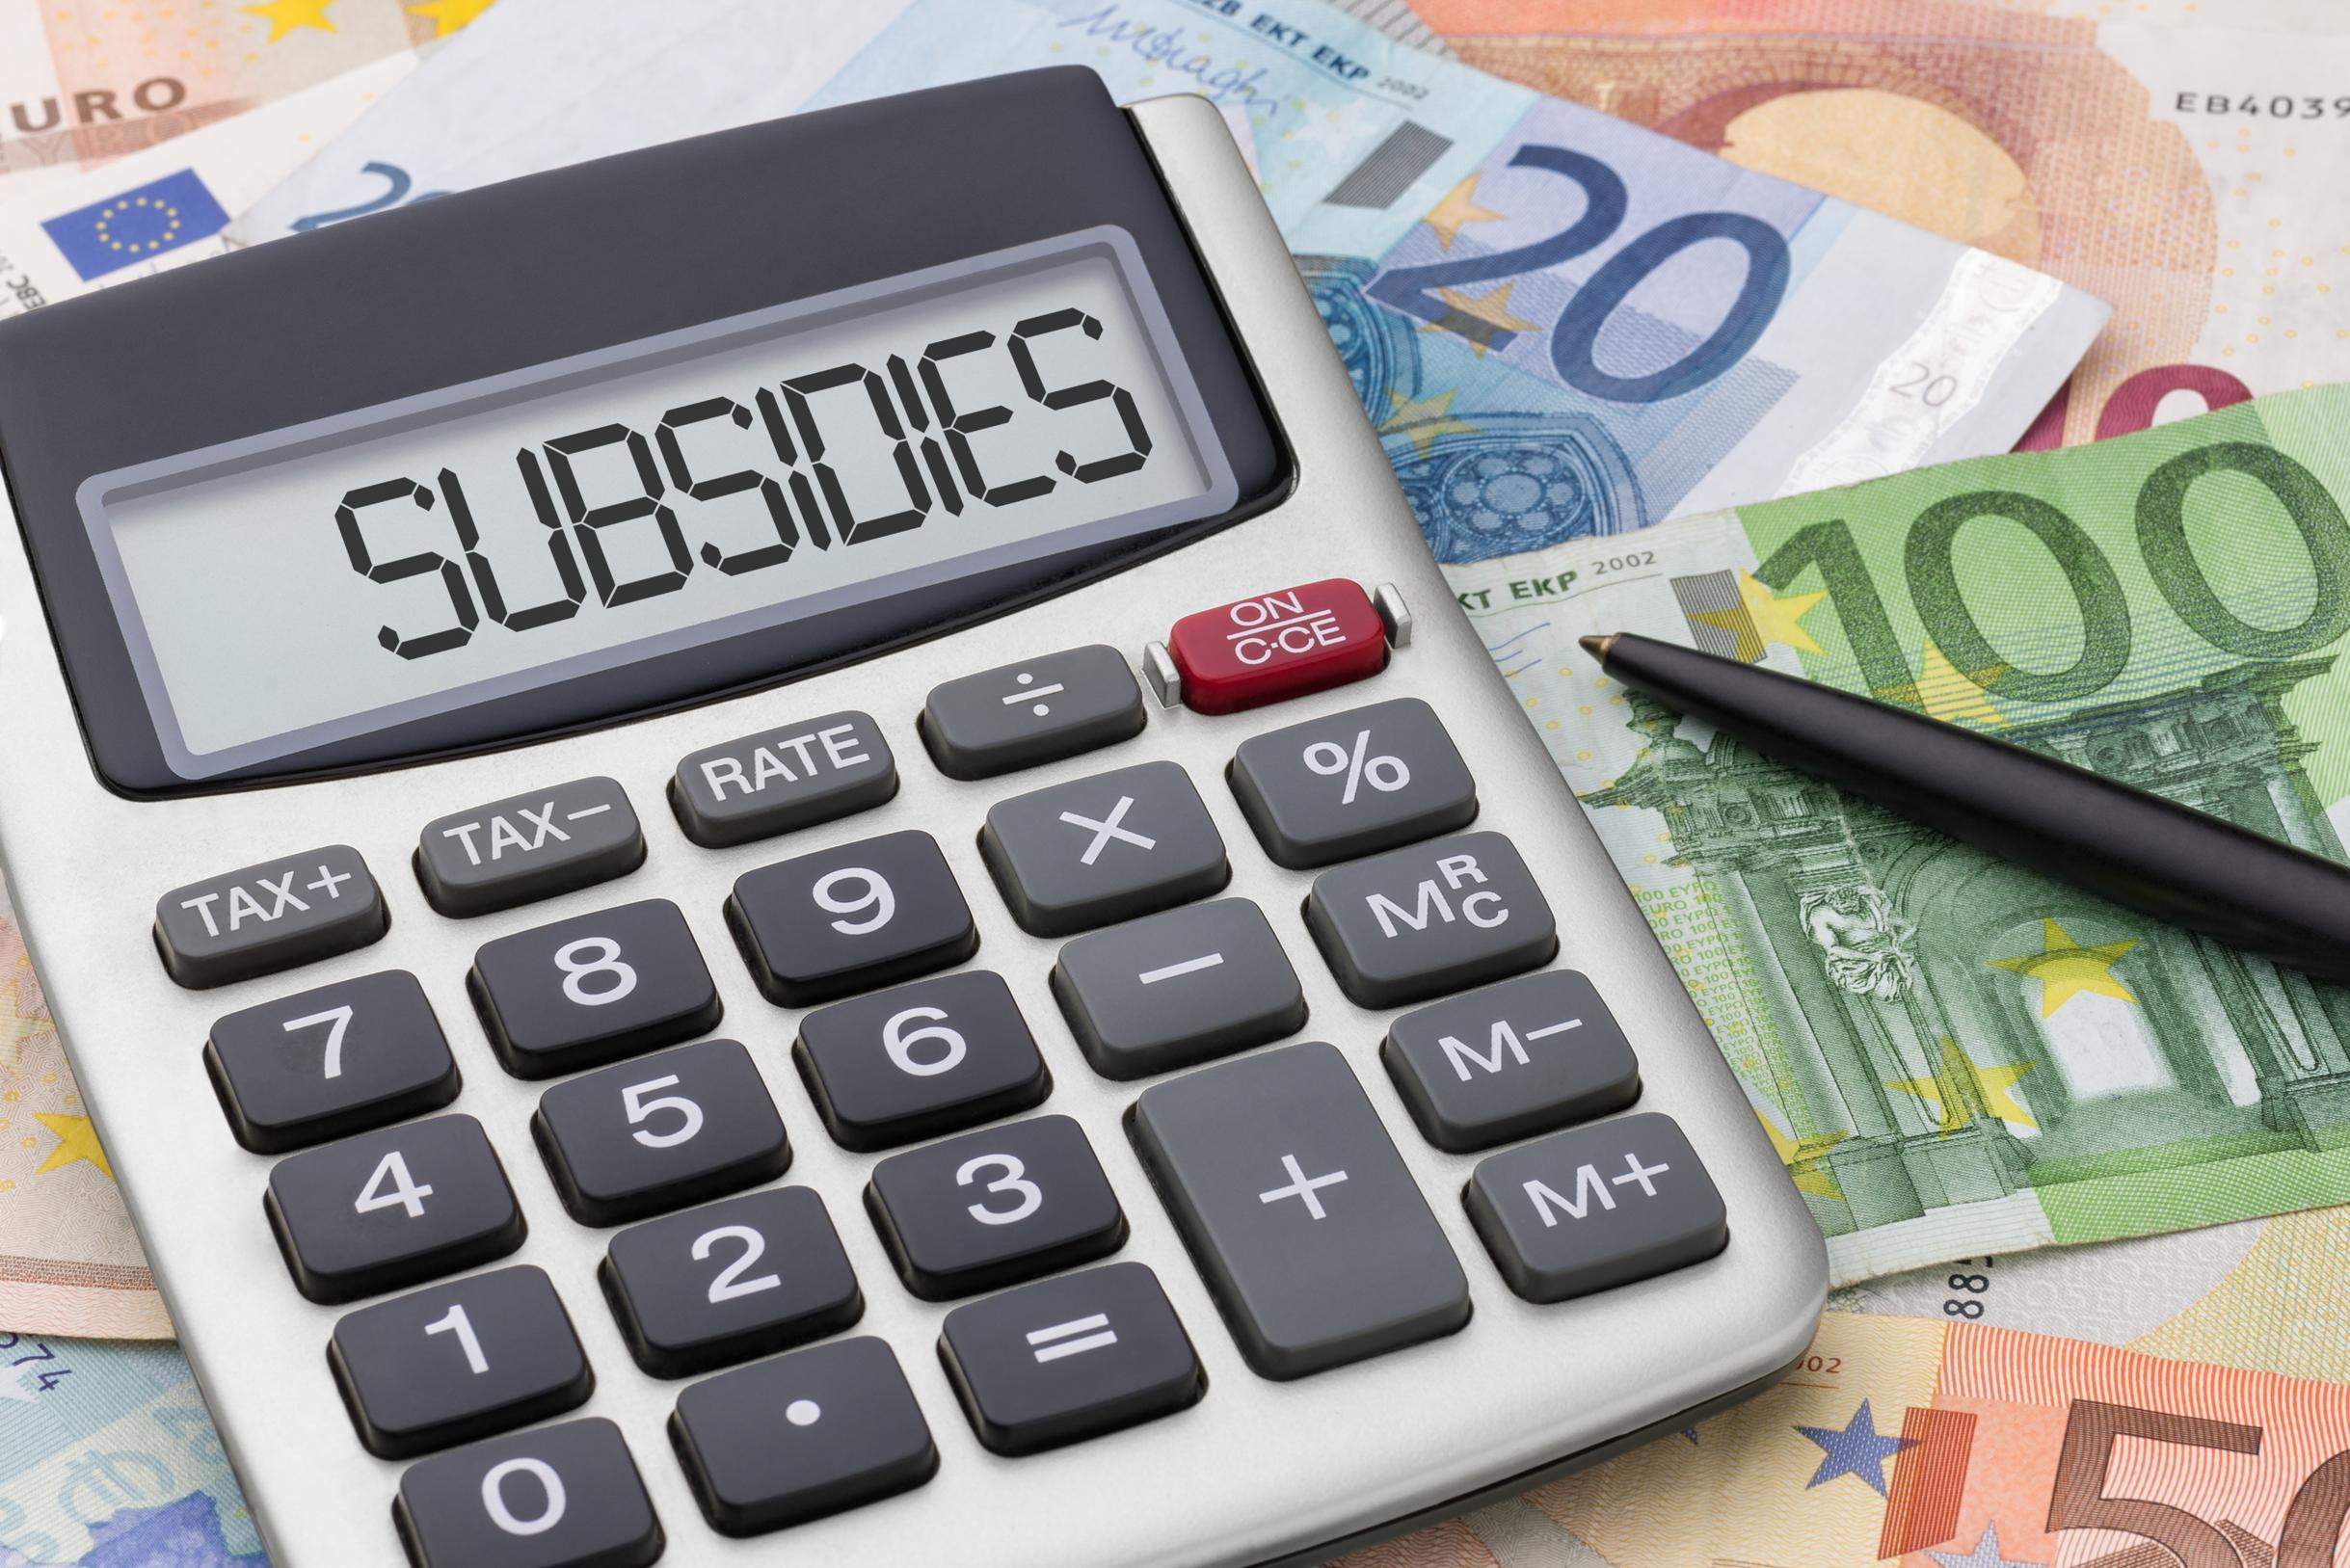 Two major cities receive one third of all Flemish subsidies